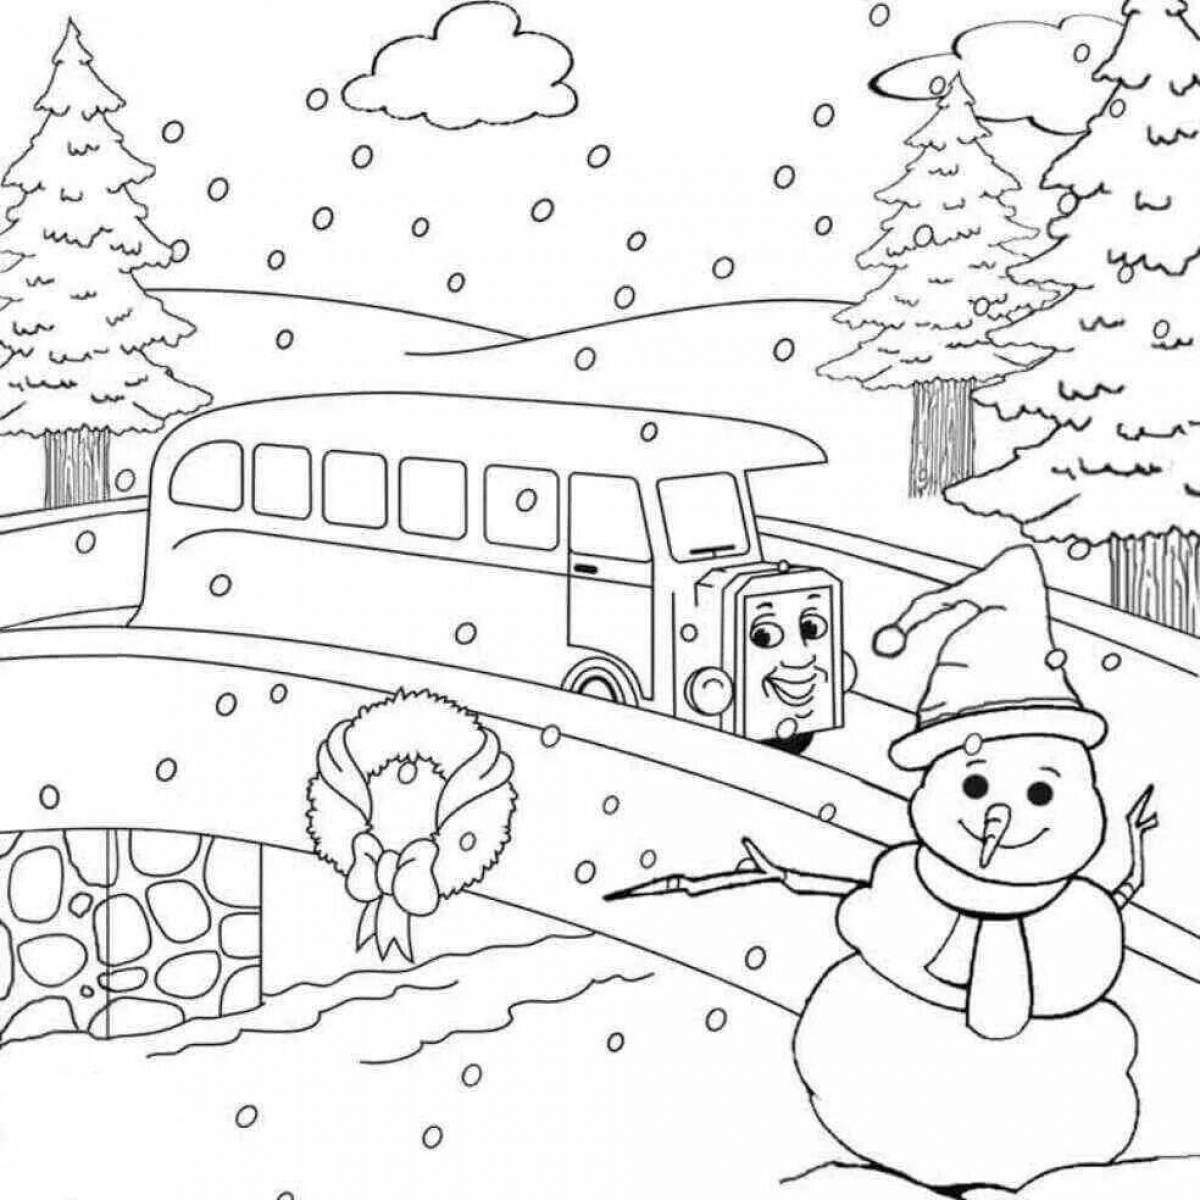 Kys turali suret awesome coloring page